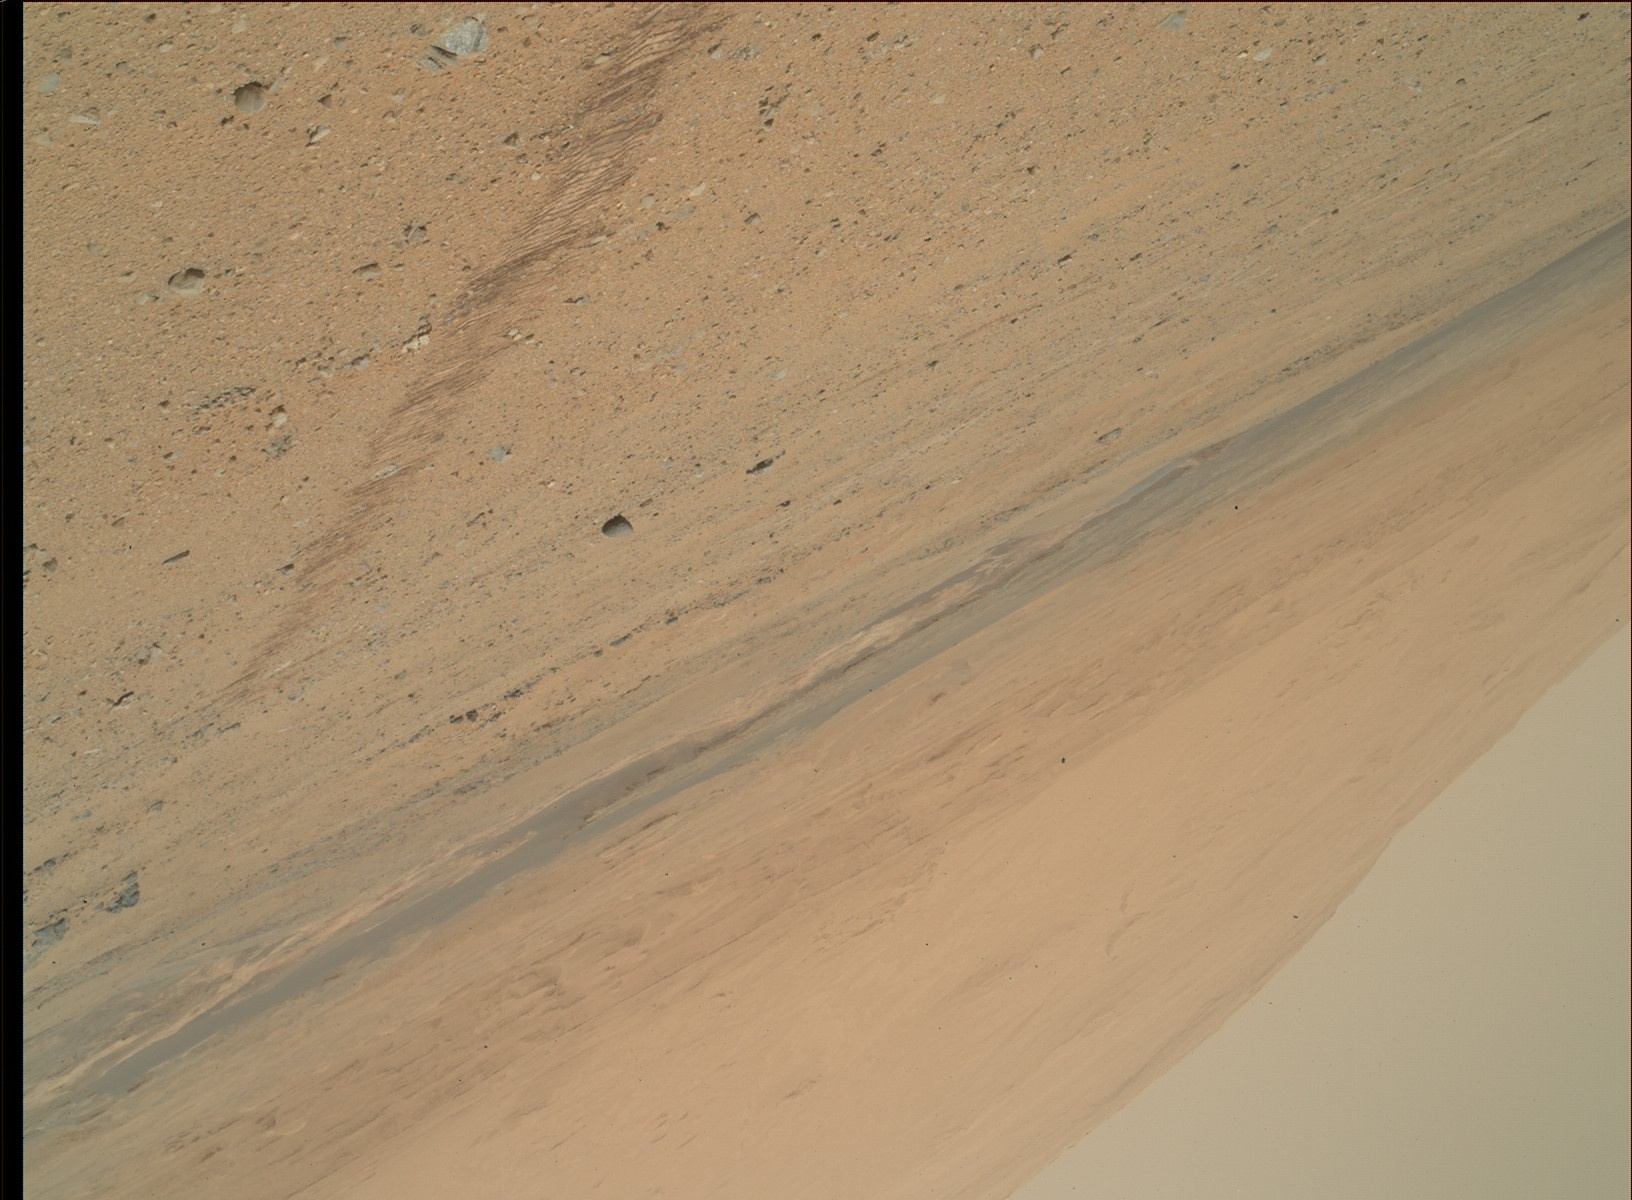 Nasa's Mars rover Curiosity acquired this image using its Mars Hand Lens Imager (MAHLI) on Sol 354